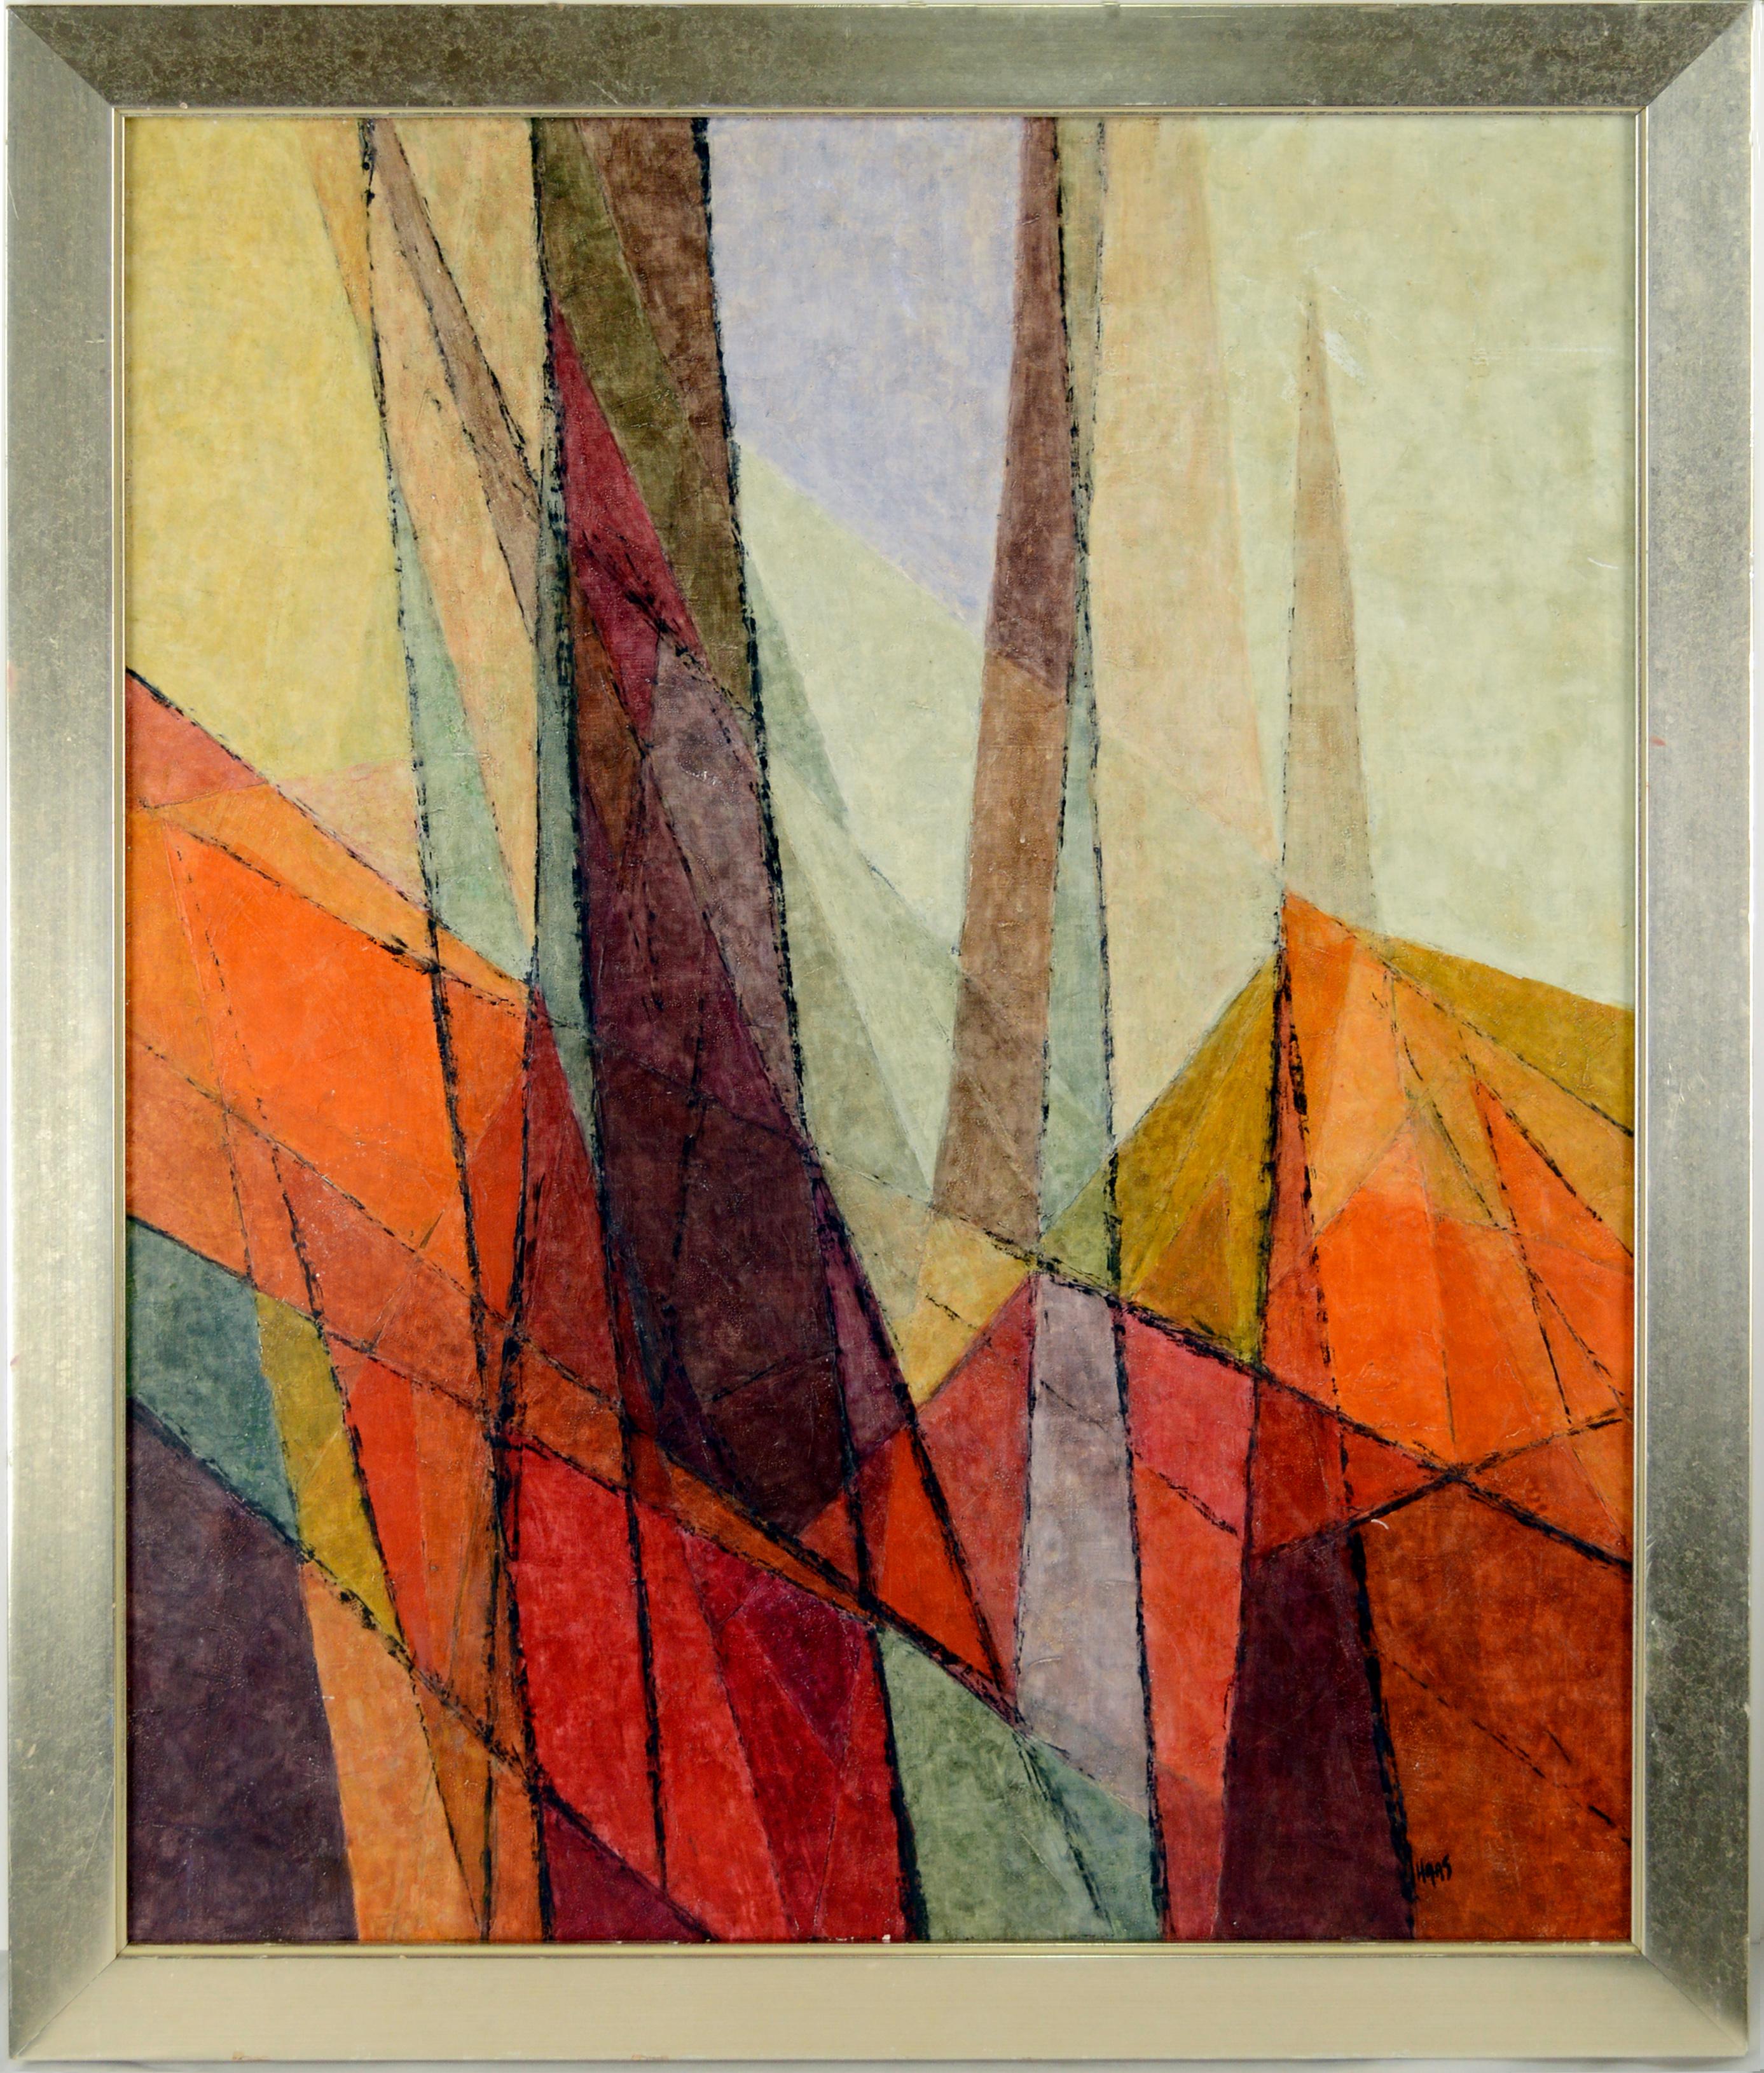 Hildegarde Hass Abstract Painting - "Red Mesa Canyon" Abstract Geometric Landscape Bay Area 1965 Artist Casein Paint